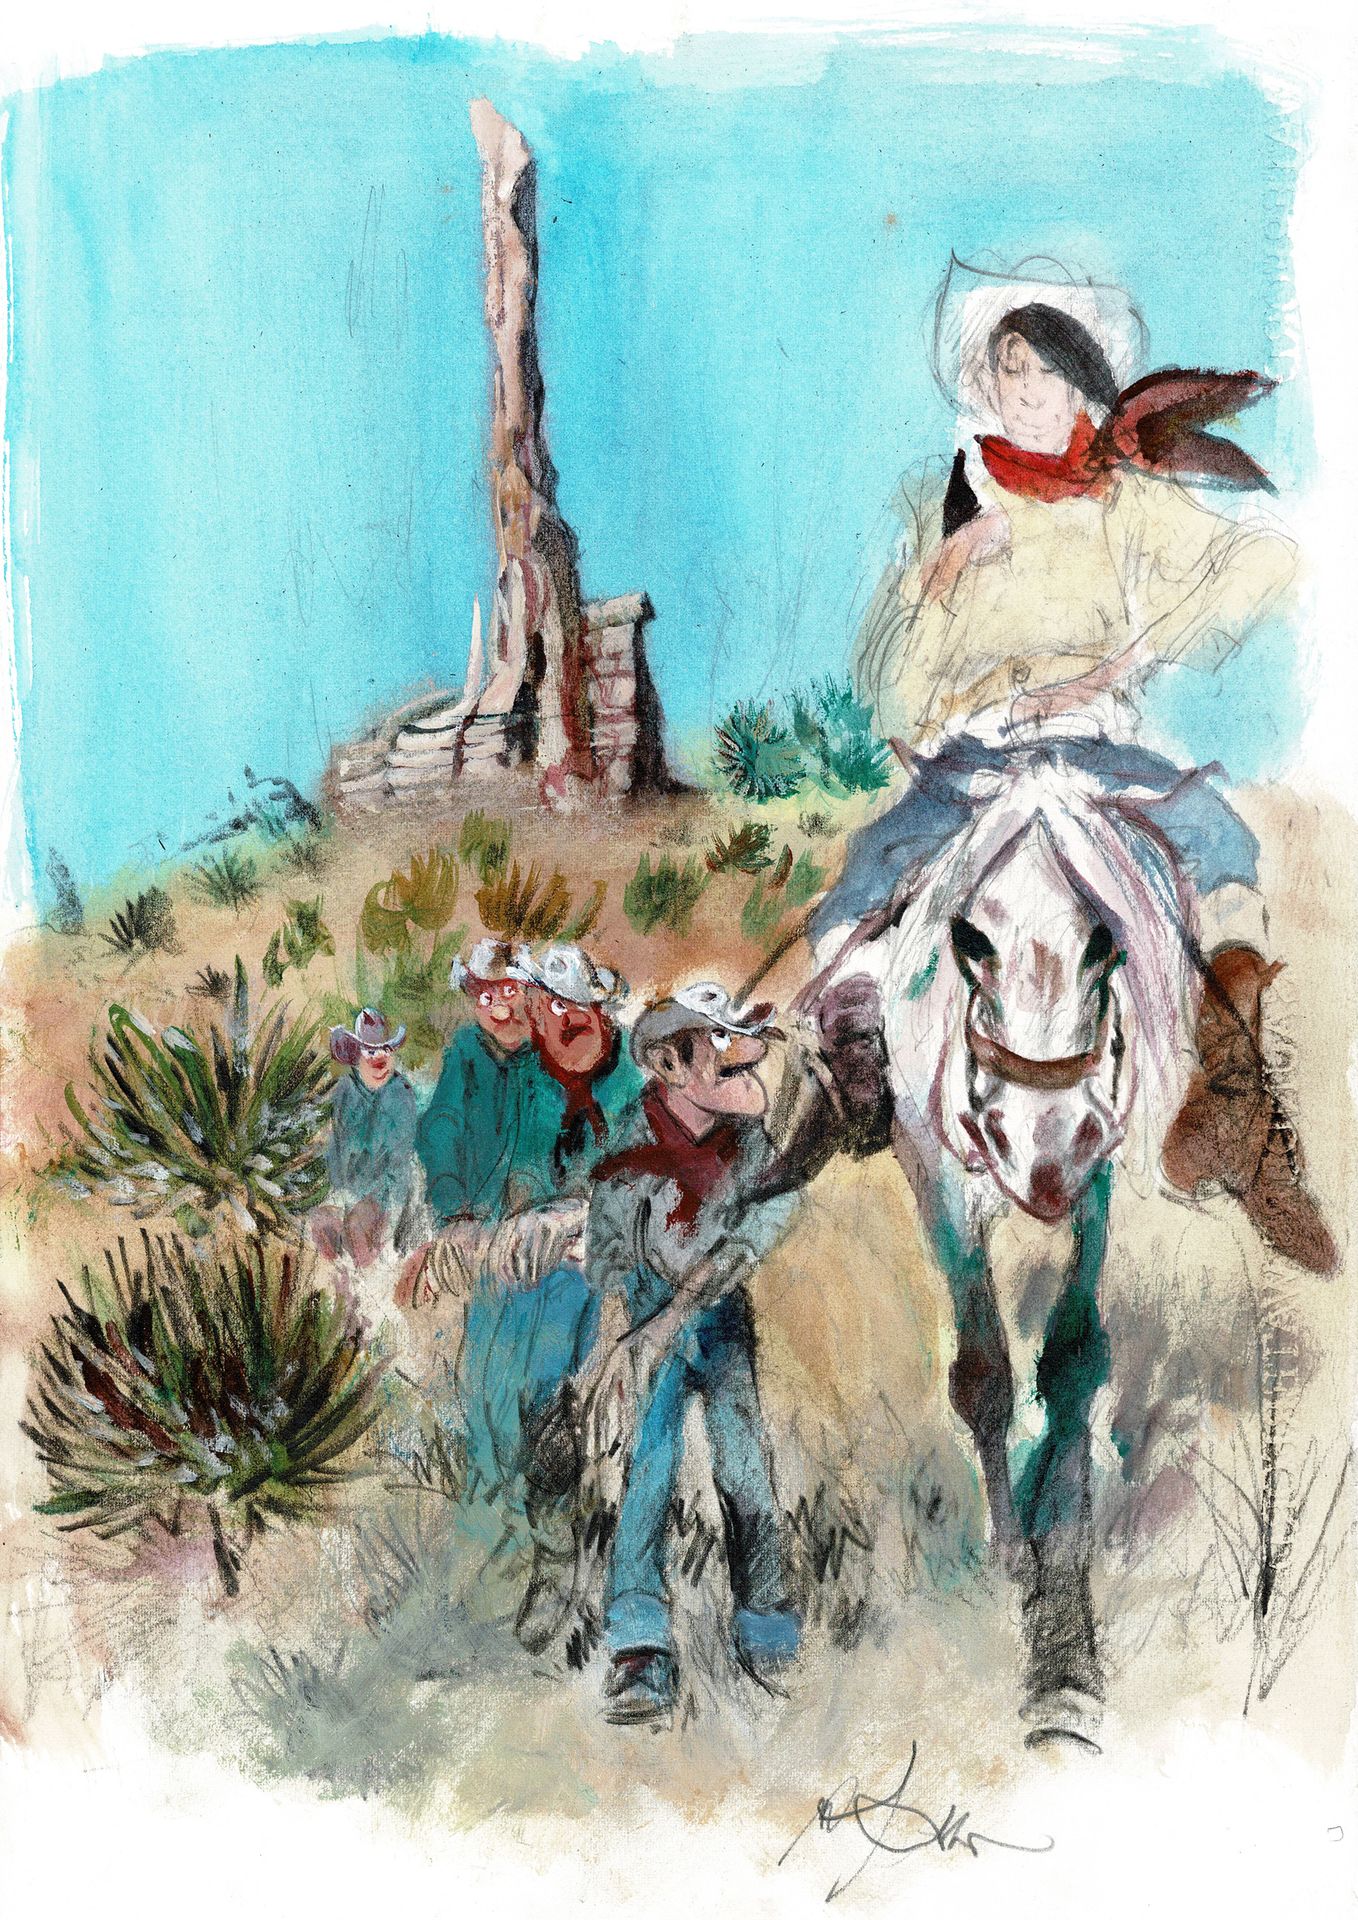 René FOLLET 
Lucky Luke and the Dalton, original large size watercolor drawing i&hellip;